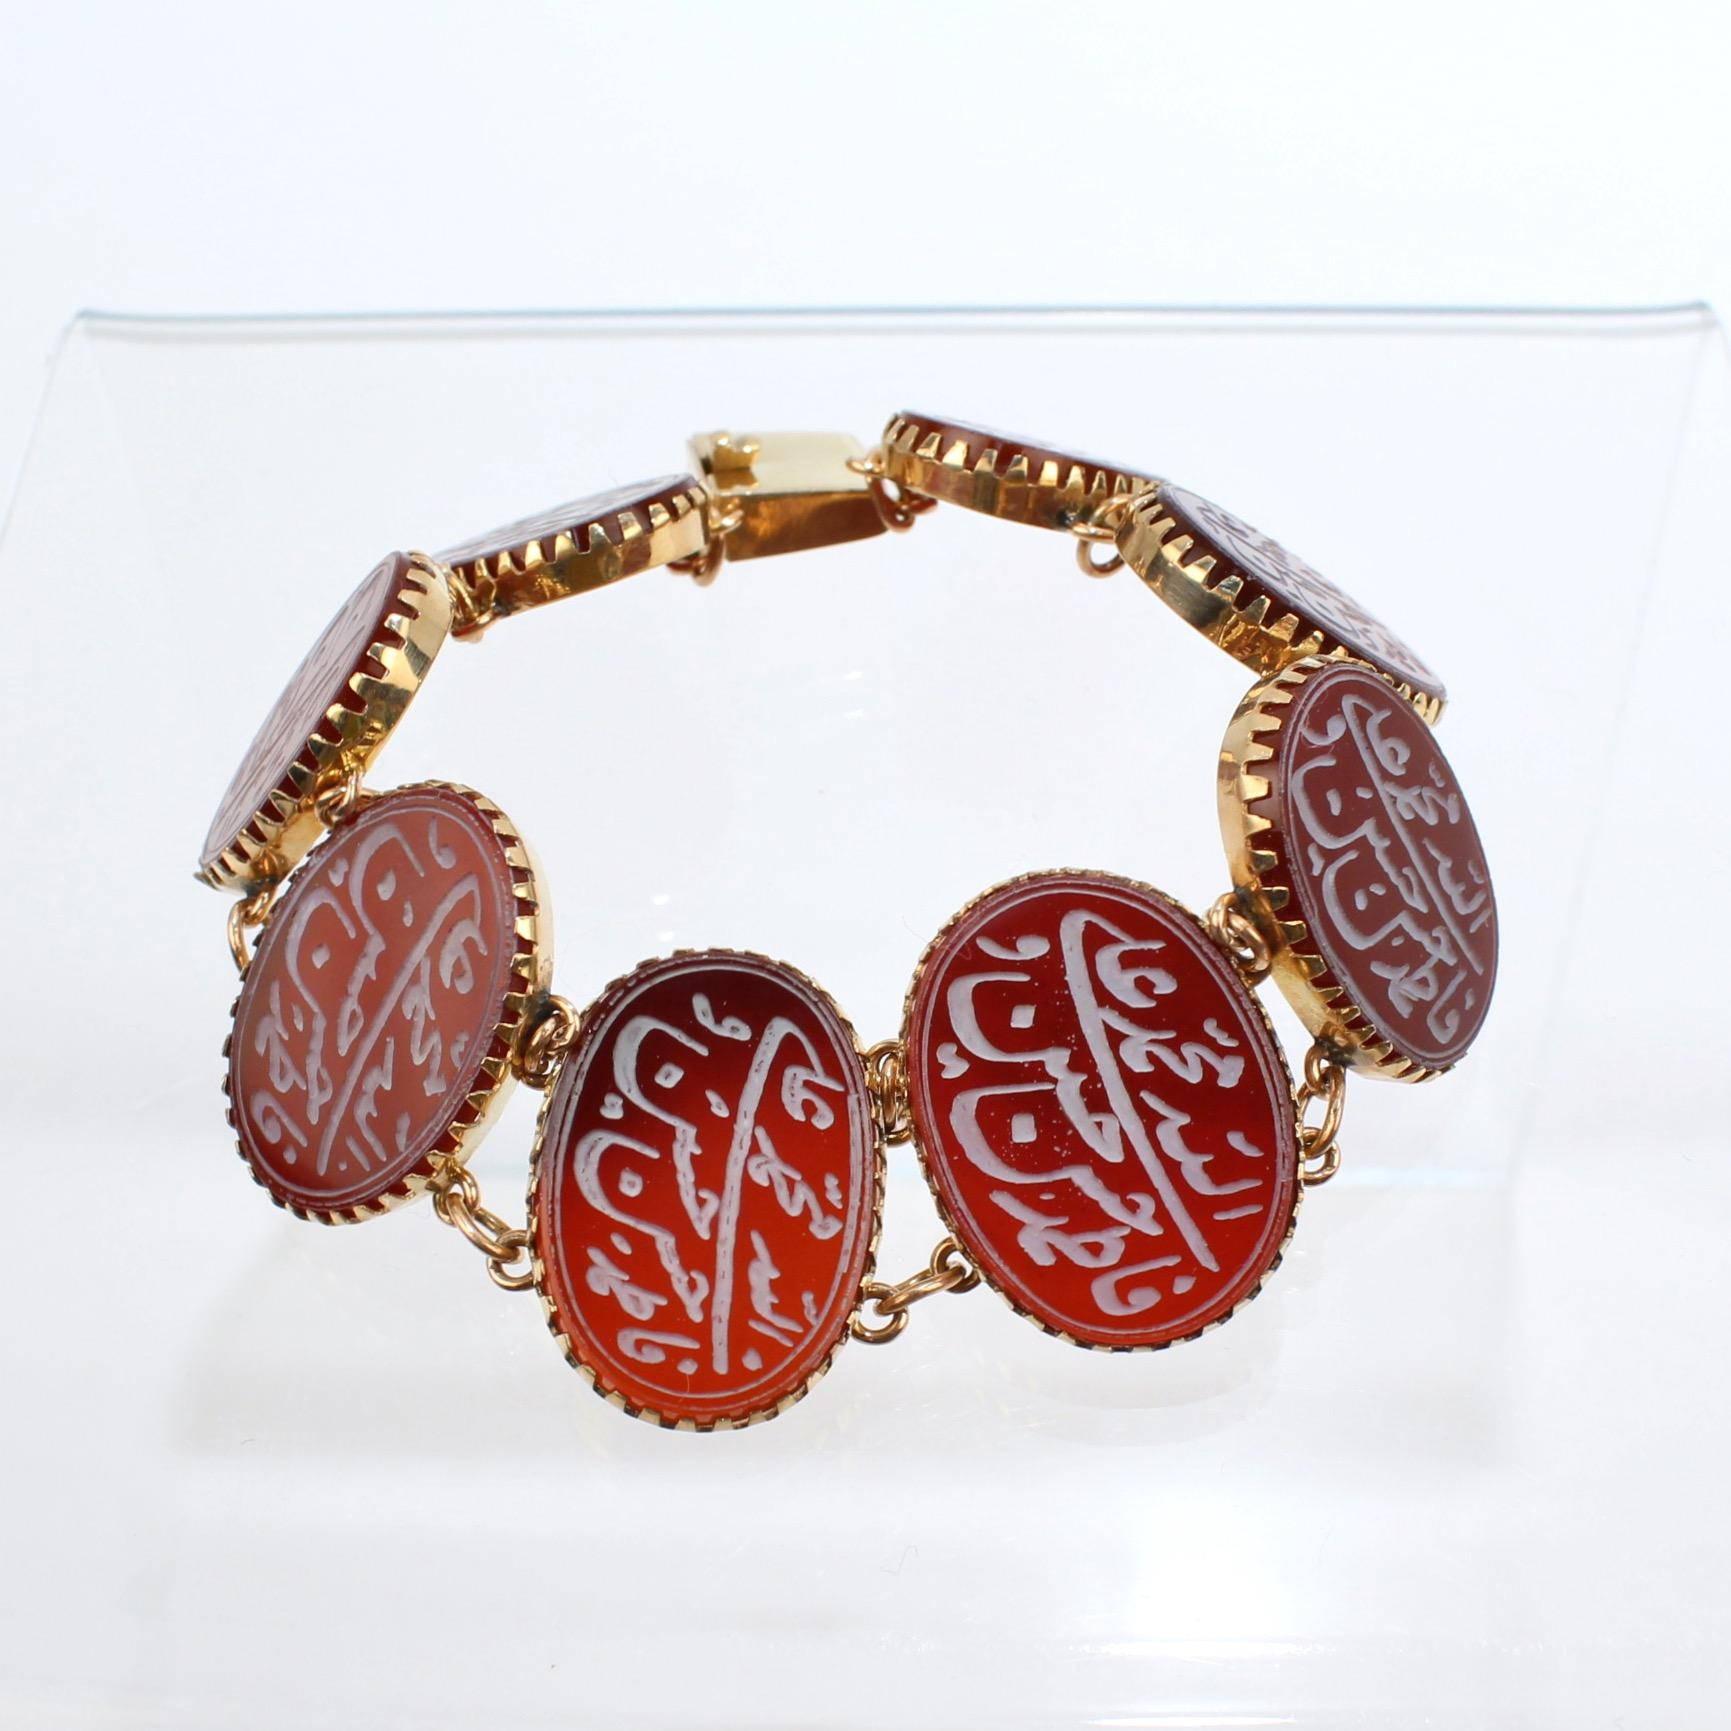 A very fine carved Carnelian amulet bracelet.

With oval carnelian amulets that are bezel set in 14k gold.  

Each flat carnelian cabochon is carved with Arabic inscriptions the holy names in Islam of Allah, Mohammed, Ali, Fatima, Hassan,